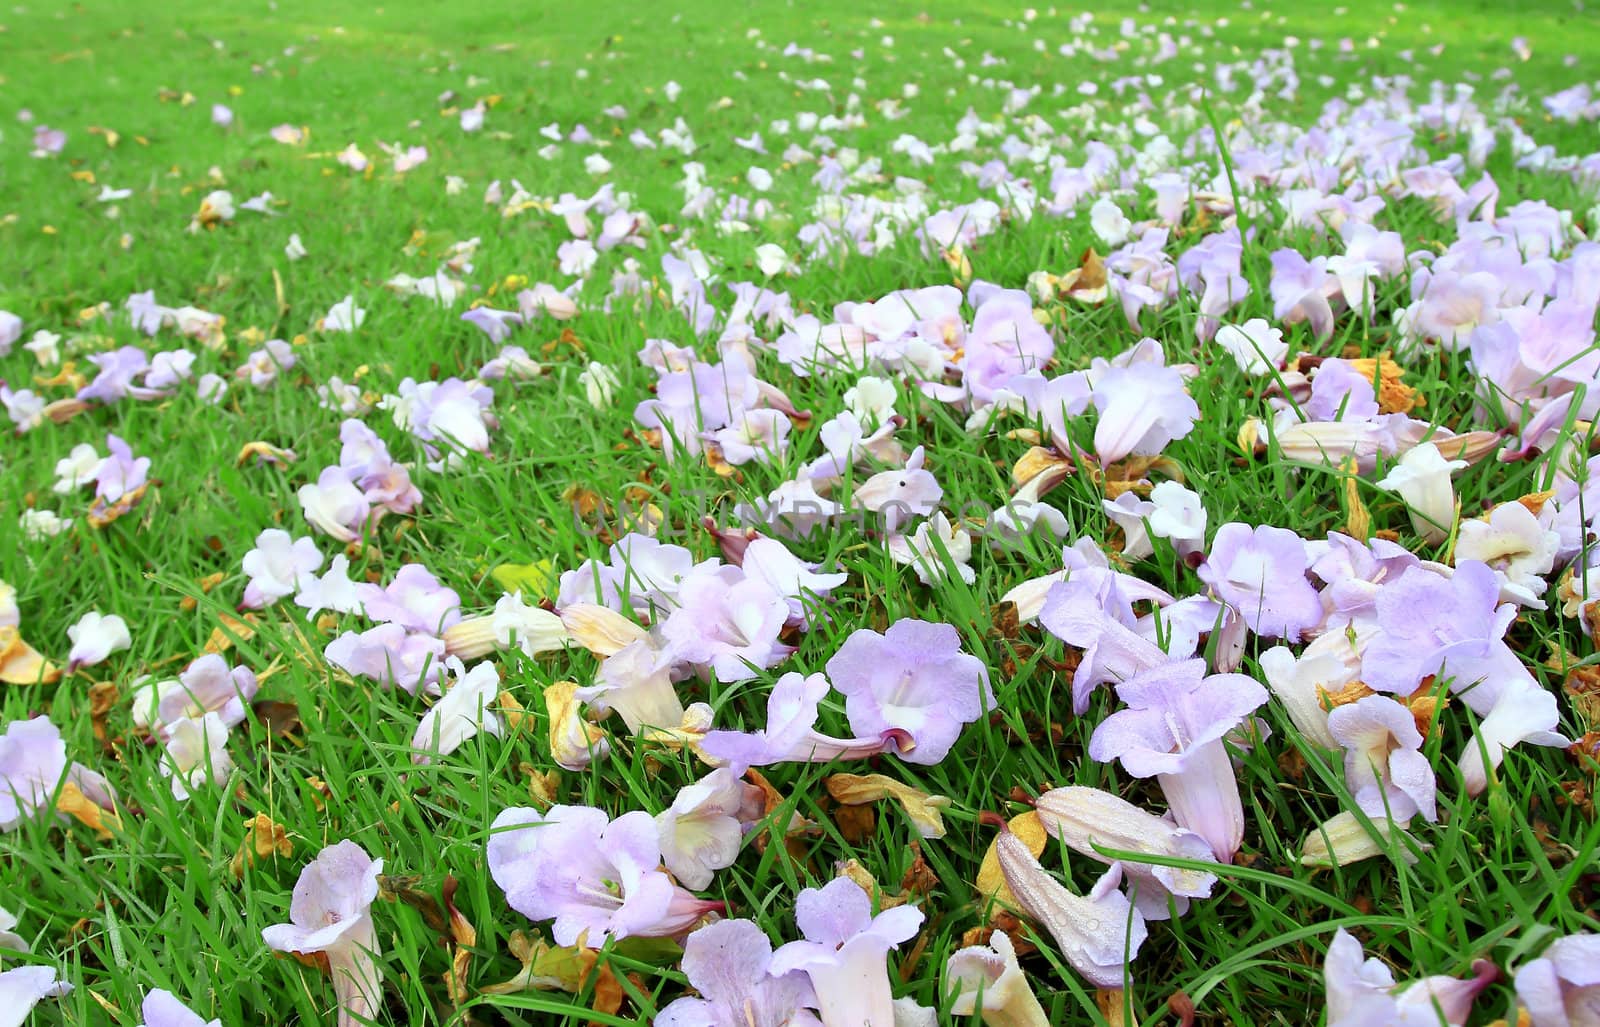 purple and white crocus field with grass in spring time